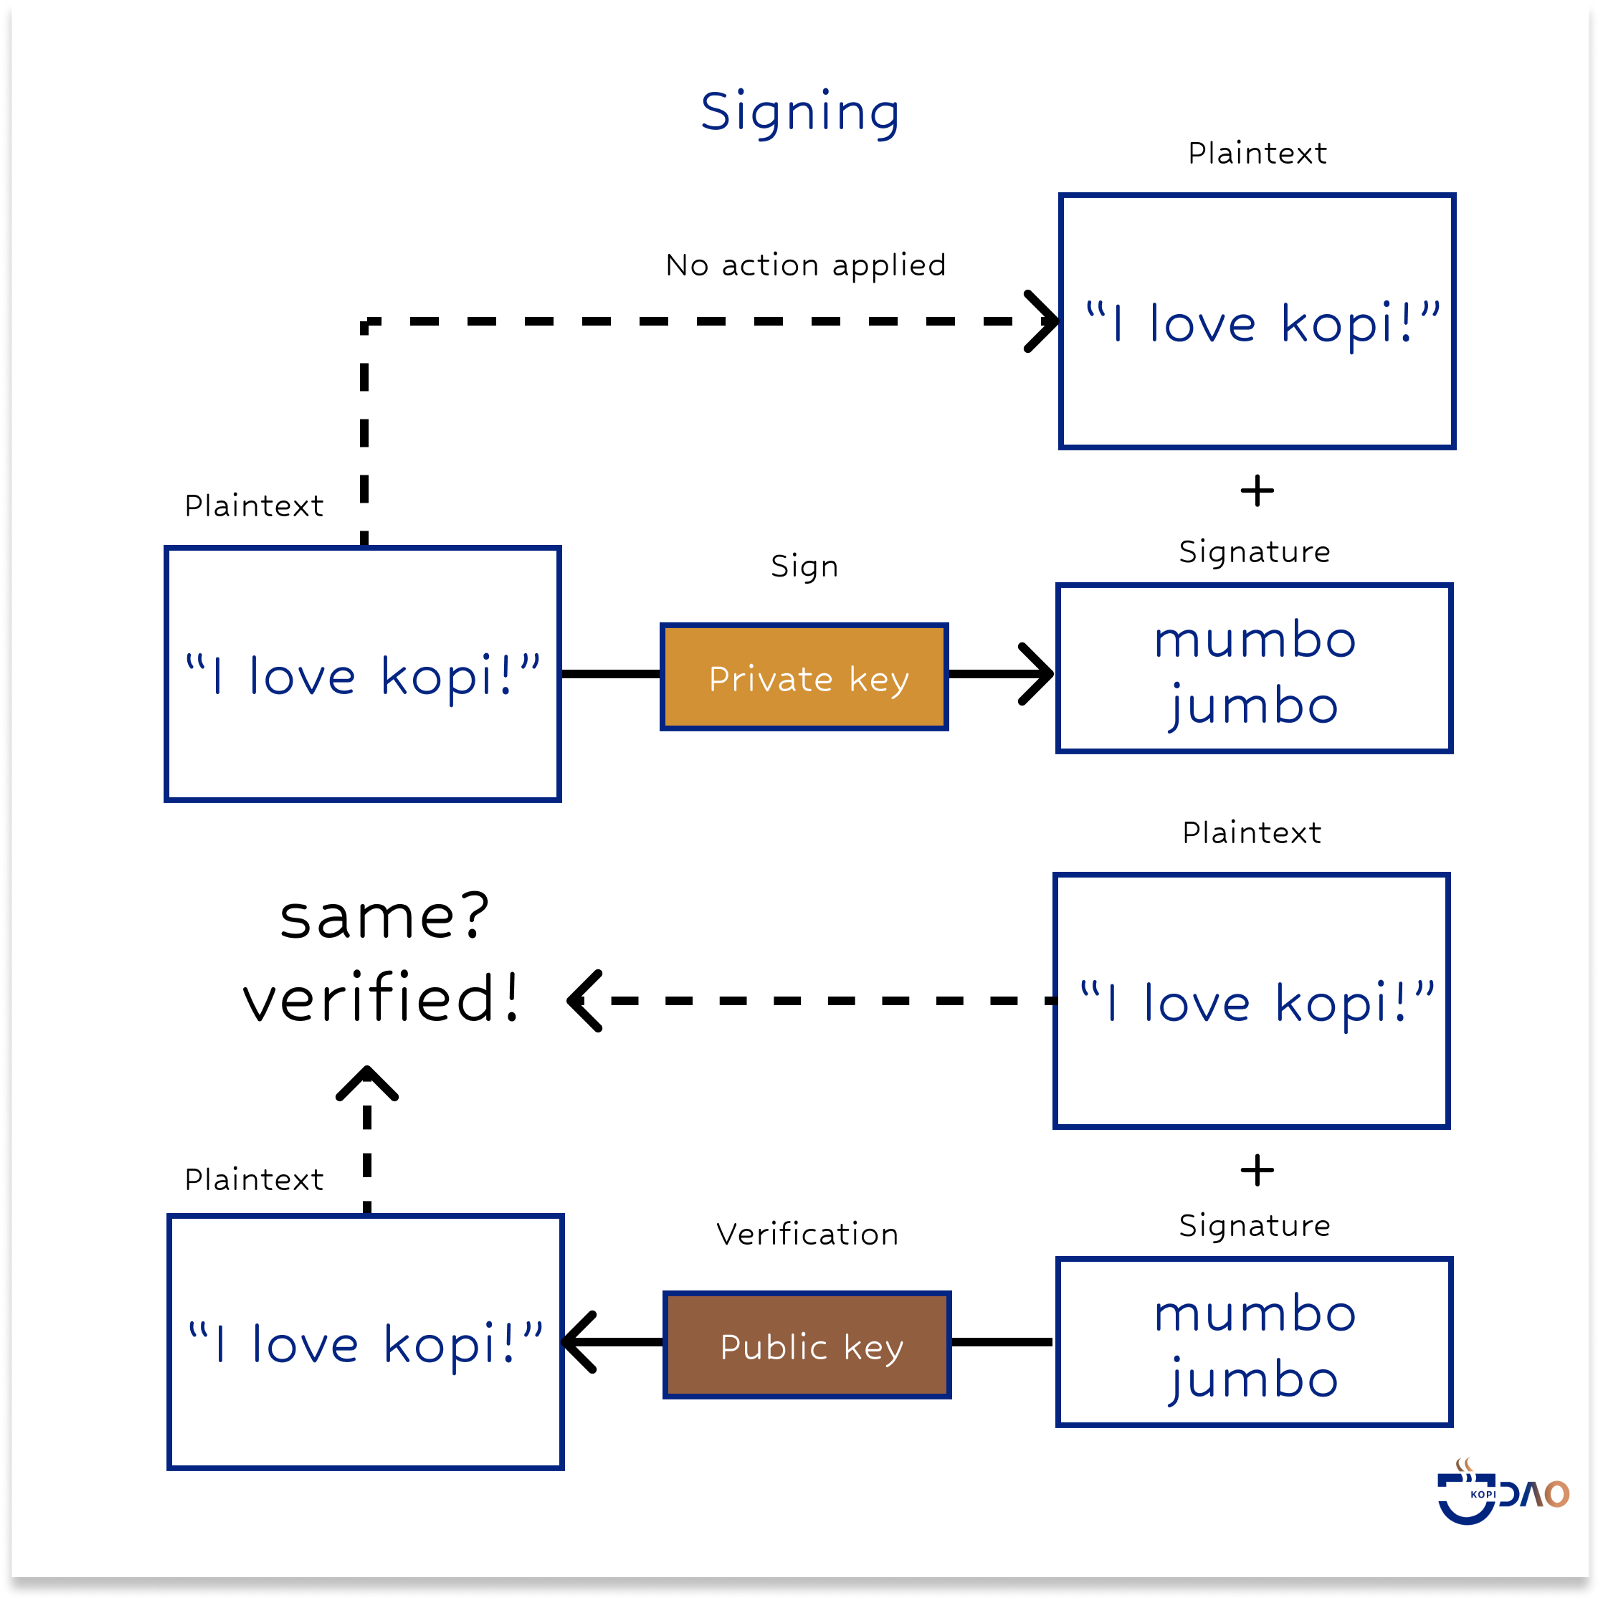 The private key is applied to sign the original message, whereas the public key can be used to verify the signature. Do note that the original plaintext will need to be compared with the “decrypted” signature. Only if they match up, then the signature is verified!